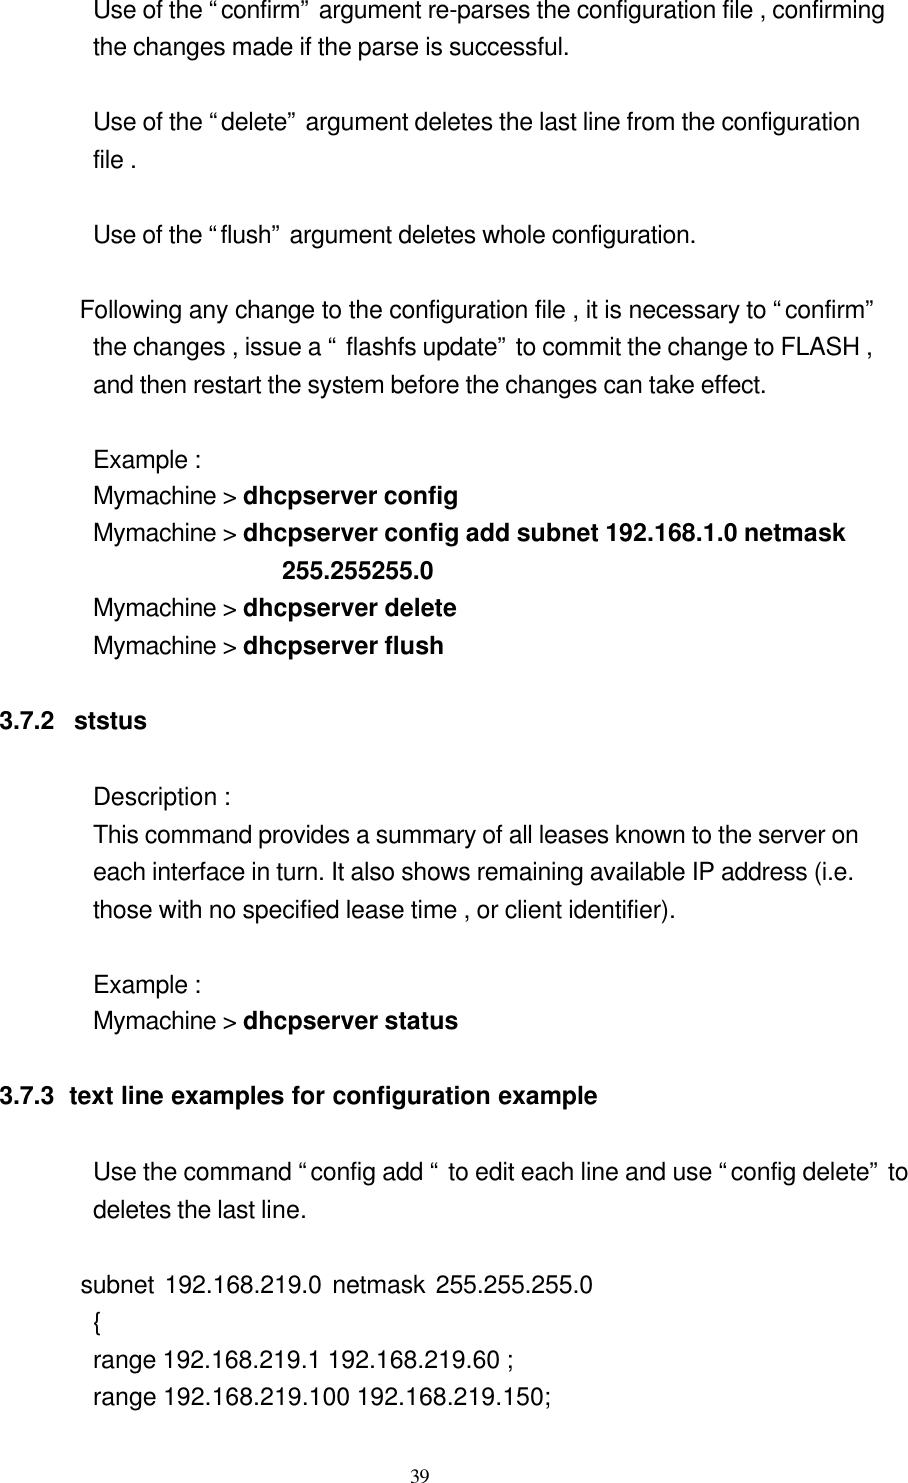  39 Use of the “confirm” argument re-parses the configuration file , confirming   the changes made if the parse is successful.  Use of the “delete” argument deletes the last line from the configuration   file .  Use of the “flush” argument deletes whole configuration.        Following any change to the configuration file , it is necessary to “confirm”   the changes , issue a “ flashfs update” to commit the change to FLASH ,   and then restart the system before the changes can take effect.  Example : Mymachine &gt; dhcpserver config Mymachine &gt; dhcpserver config add subnet 192.168.1.0 netmask 255.255255.0 Mymachine &gt; dhcpserver delete Mymachine &gt; dhcpserver flush  3.7.2  ststus     Description : This command provides a summary of all leases known to the server on   each interface in turn. It also shows remaining available IP address (i.e.   those with no specified lease time , or client identifier).  Example :   Mymachine &gt; dhcpserver status  3.7.3  text line examples for configuration example         Use the command “config add “ to edit each line and use “config delete” to   deletes the last line.        subnet 192.168.219.0 netmask 255.255.255.0       {    range 192.168.219.1 192.168.219.60 ; range 192.168.219.100 192.168.219.150; 